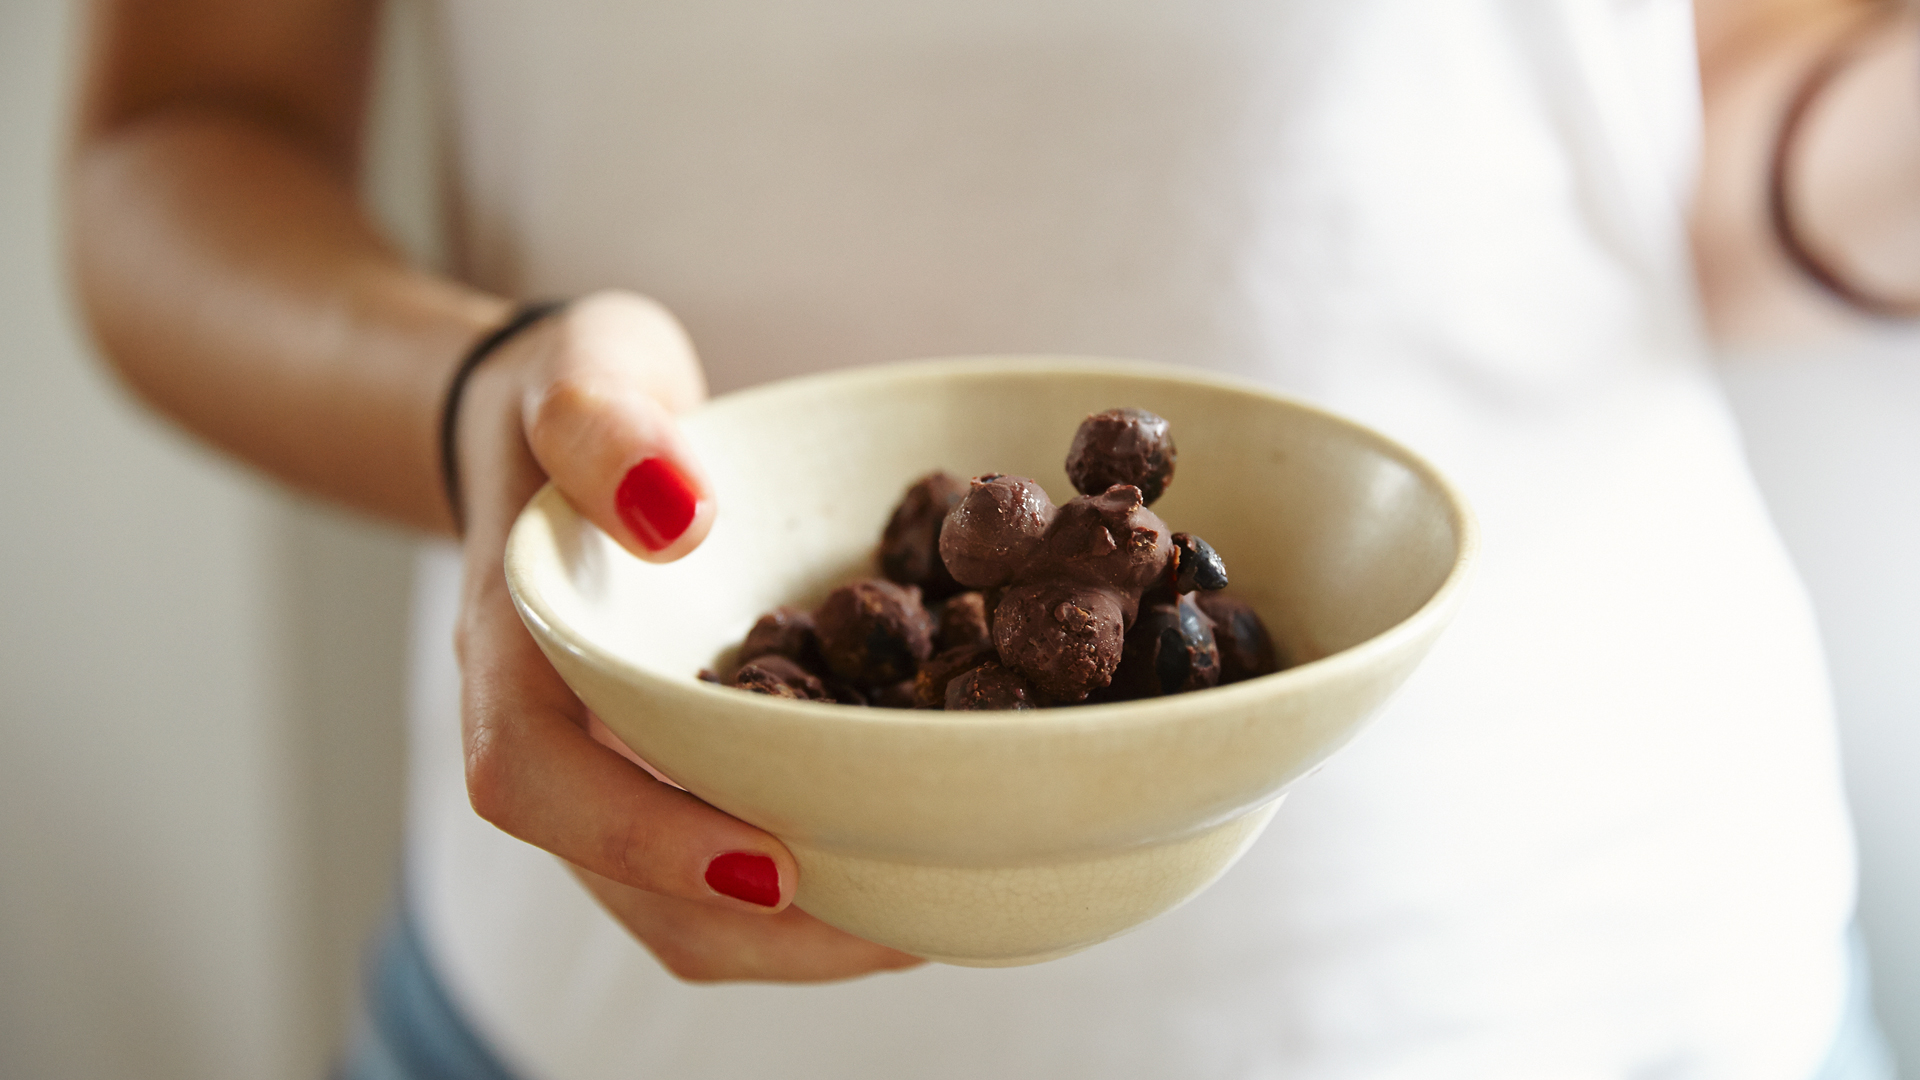 Catherine Cuello-Fuente's finished Seme-Frozen Blueberries with Raw Cacao recipe